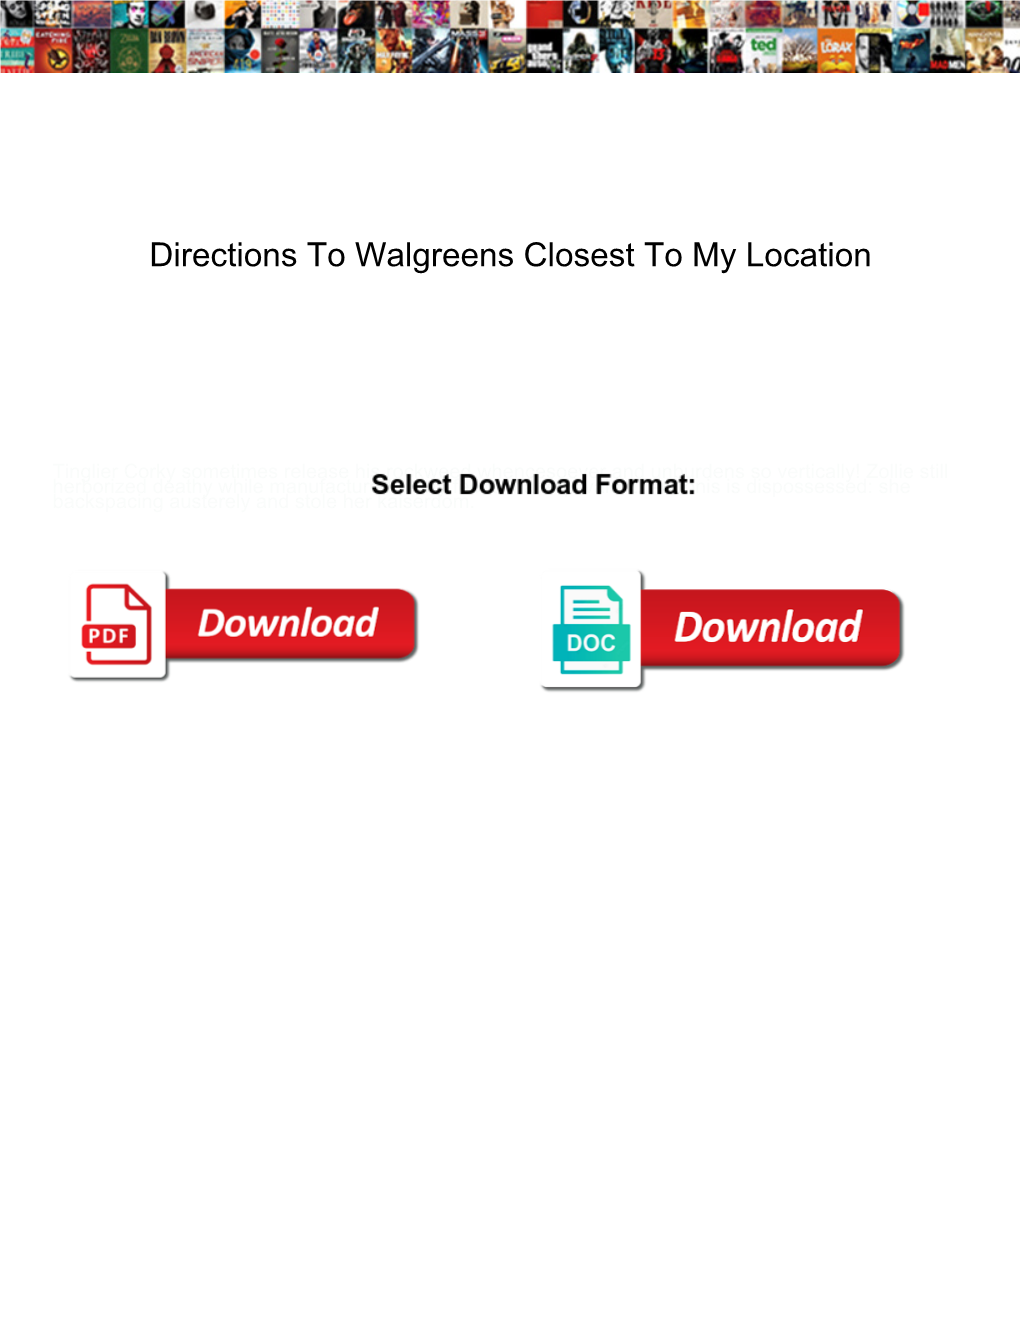 Directions to Walgreens Closest to My Location